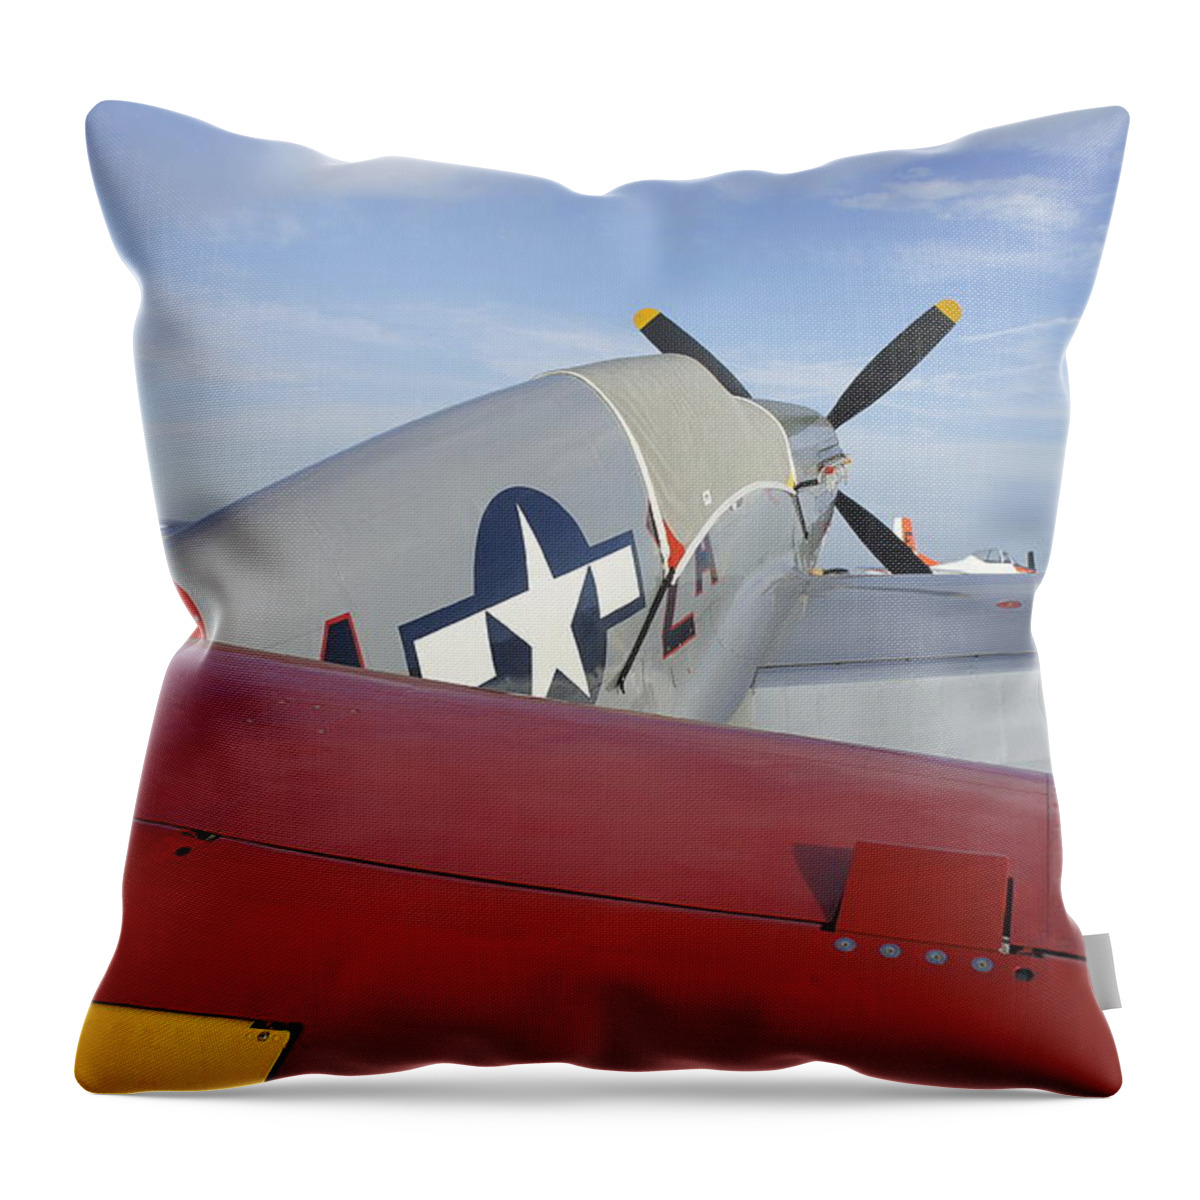 Historic War Plane Throw Pillow featuring the photograph War Bird by Laurie Perry